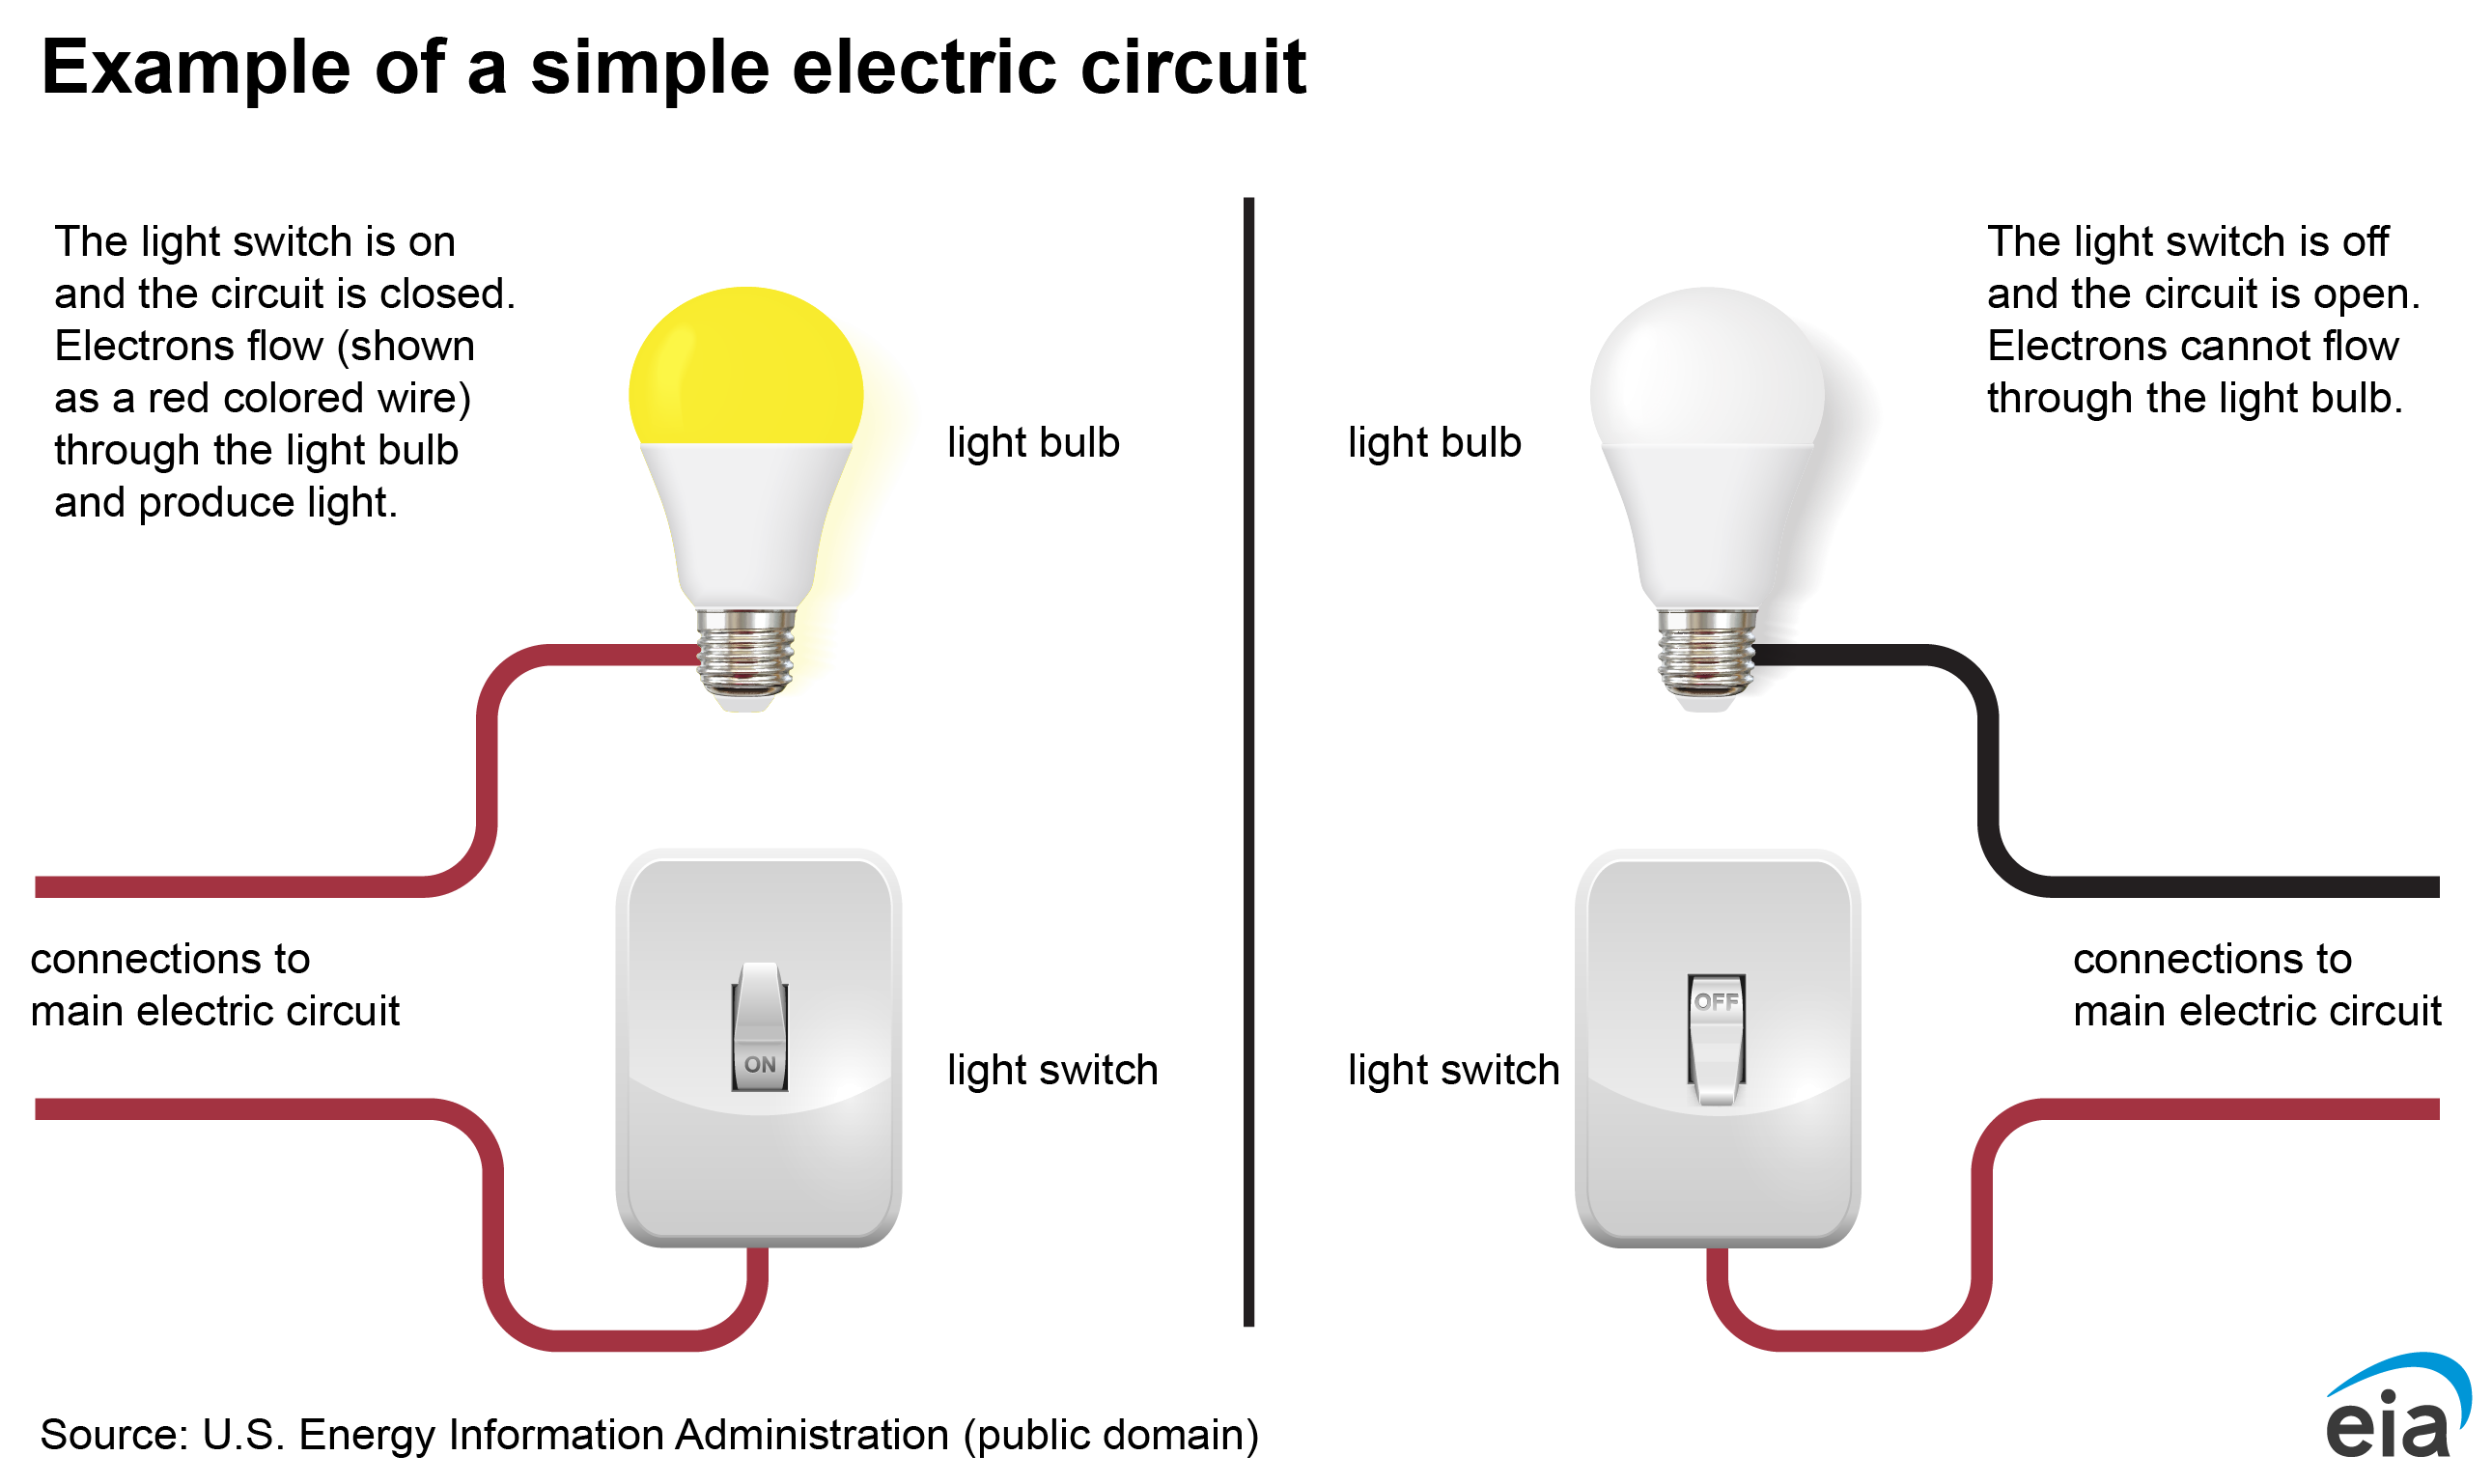 A diasgram of a simple electricity circuit with two light bulbs and swithces to show closed and open circuits.